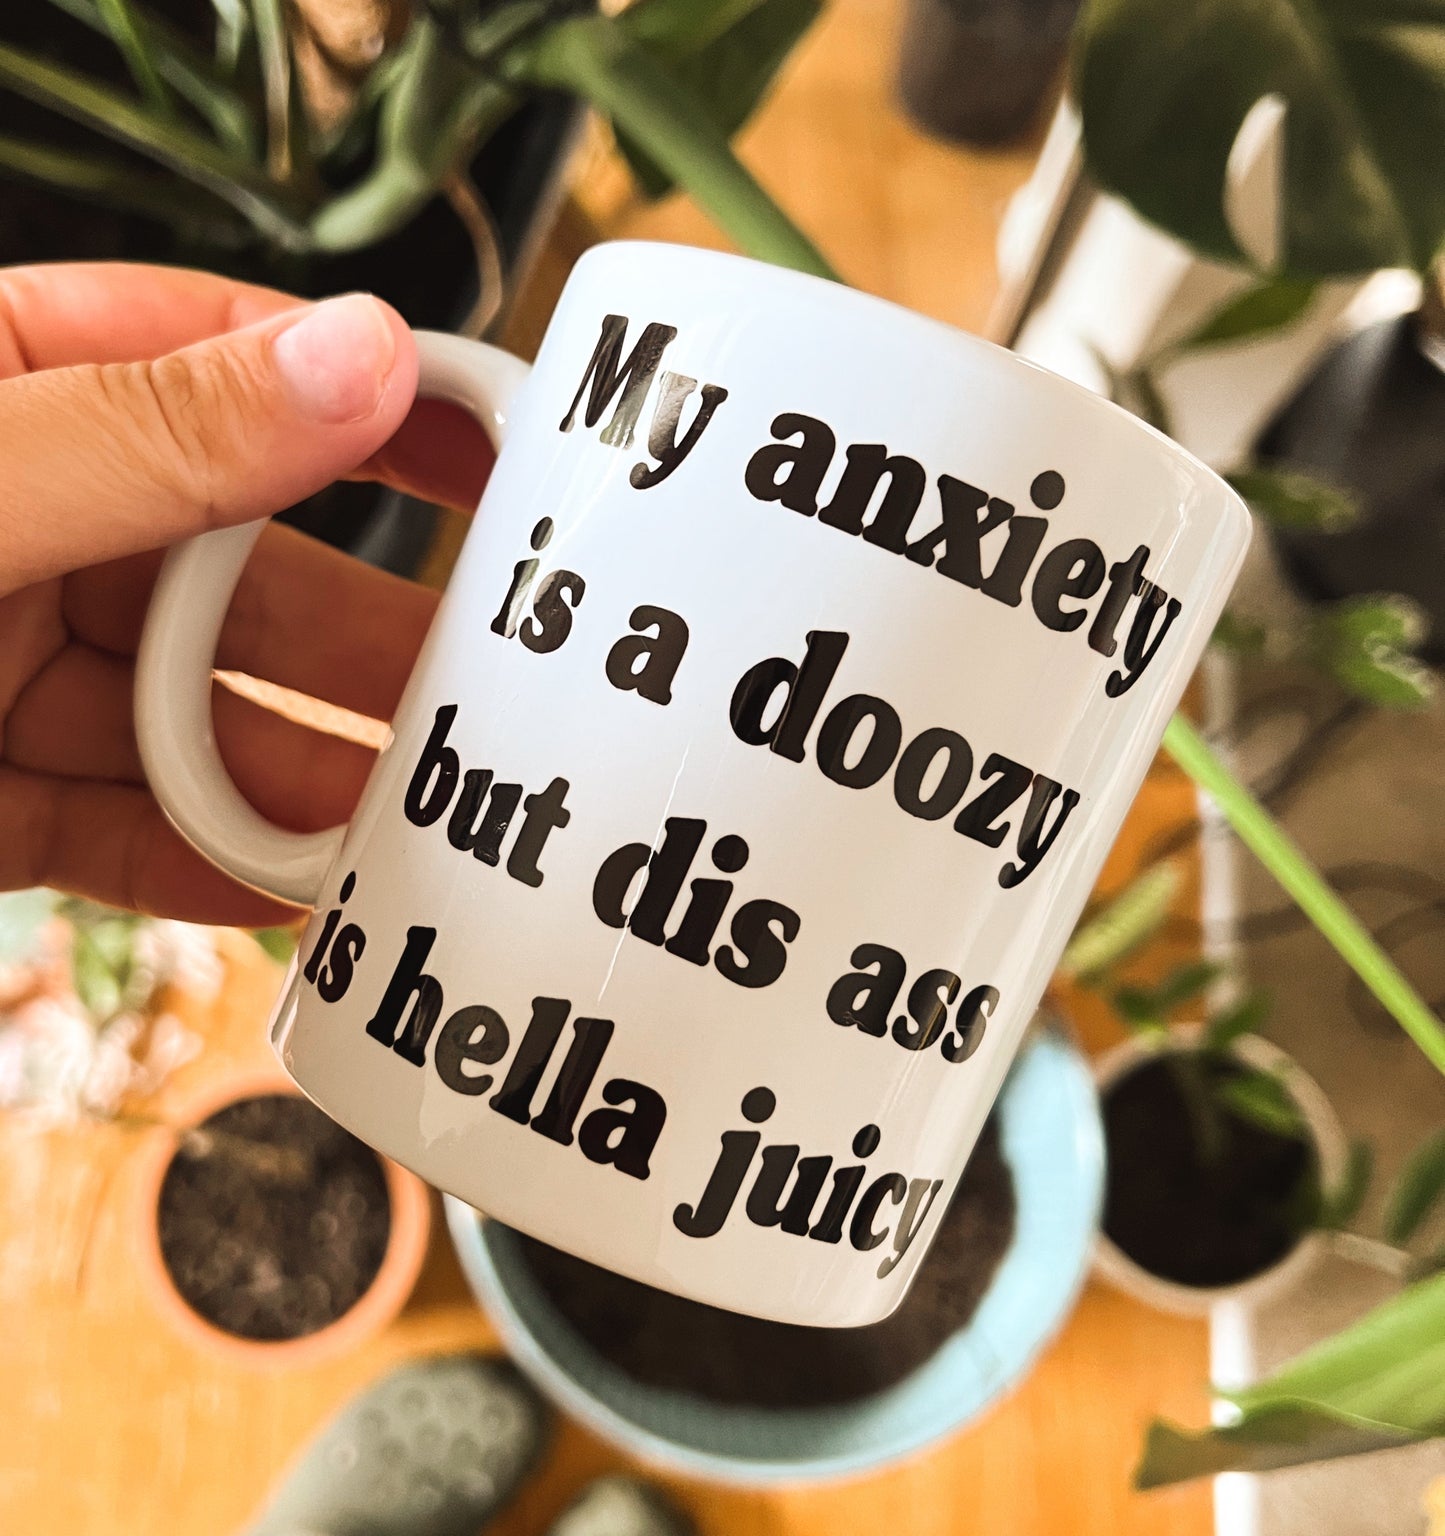 Anxiety is juicy